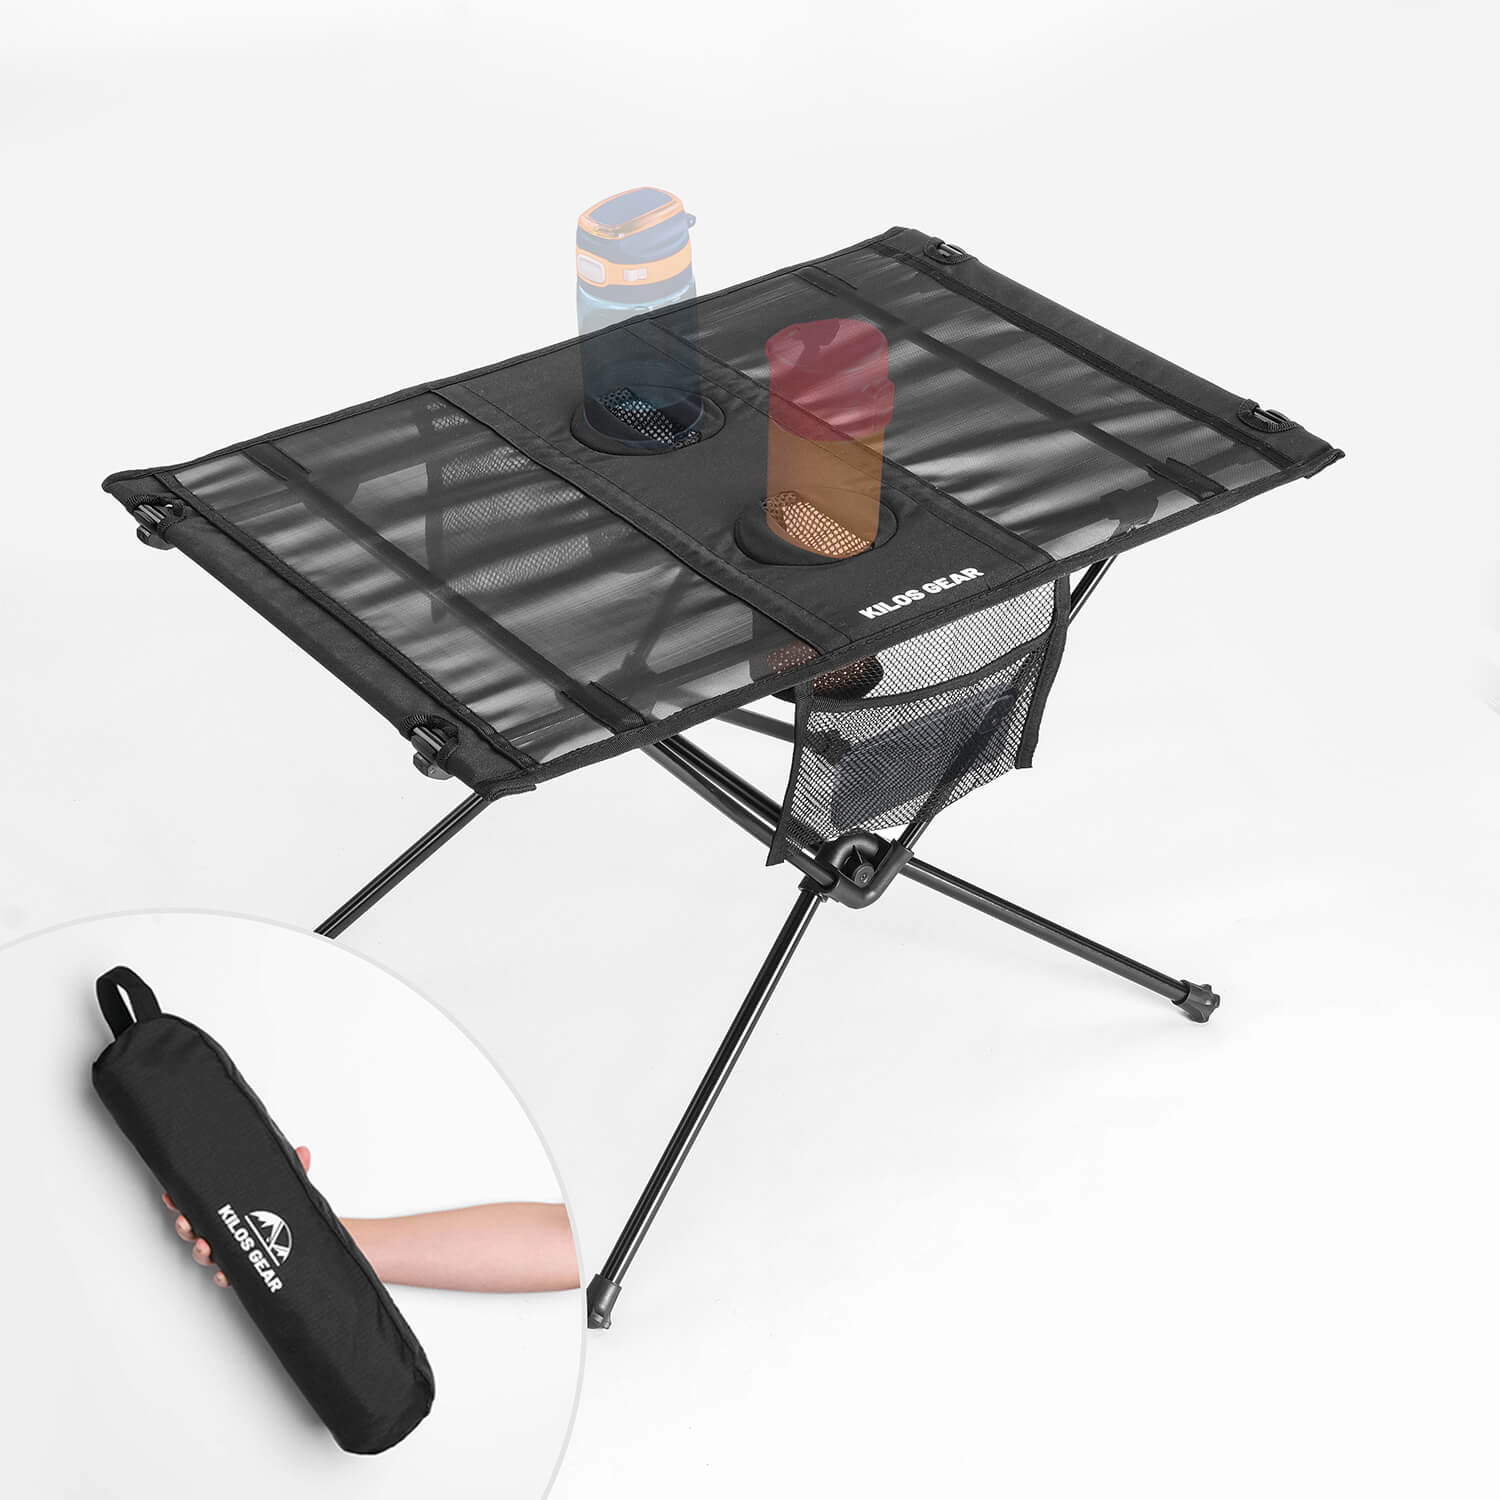 Portable Camp Table Outry Lightweight Folding Table with Cup Holders 